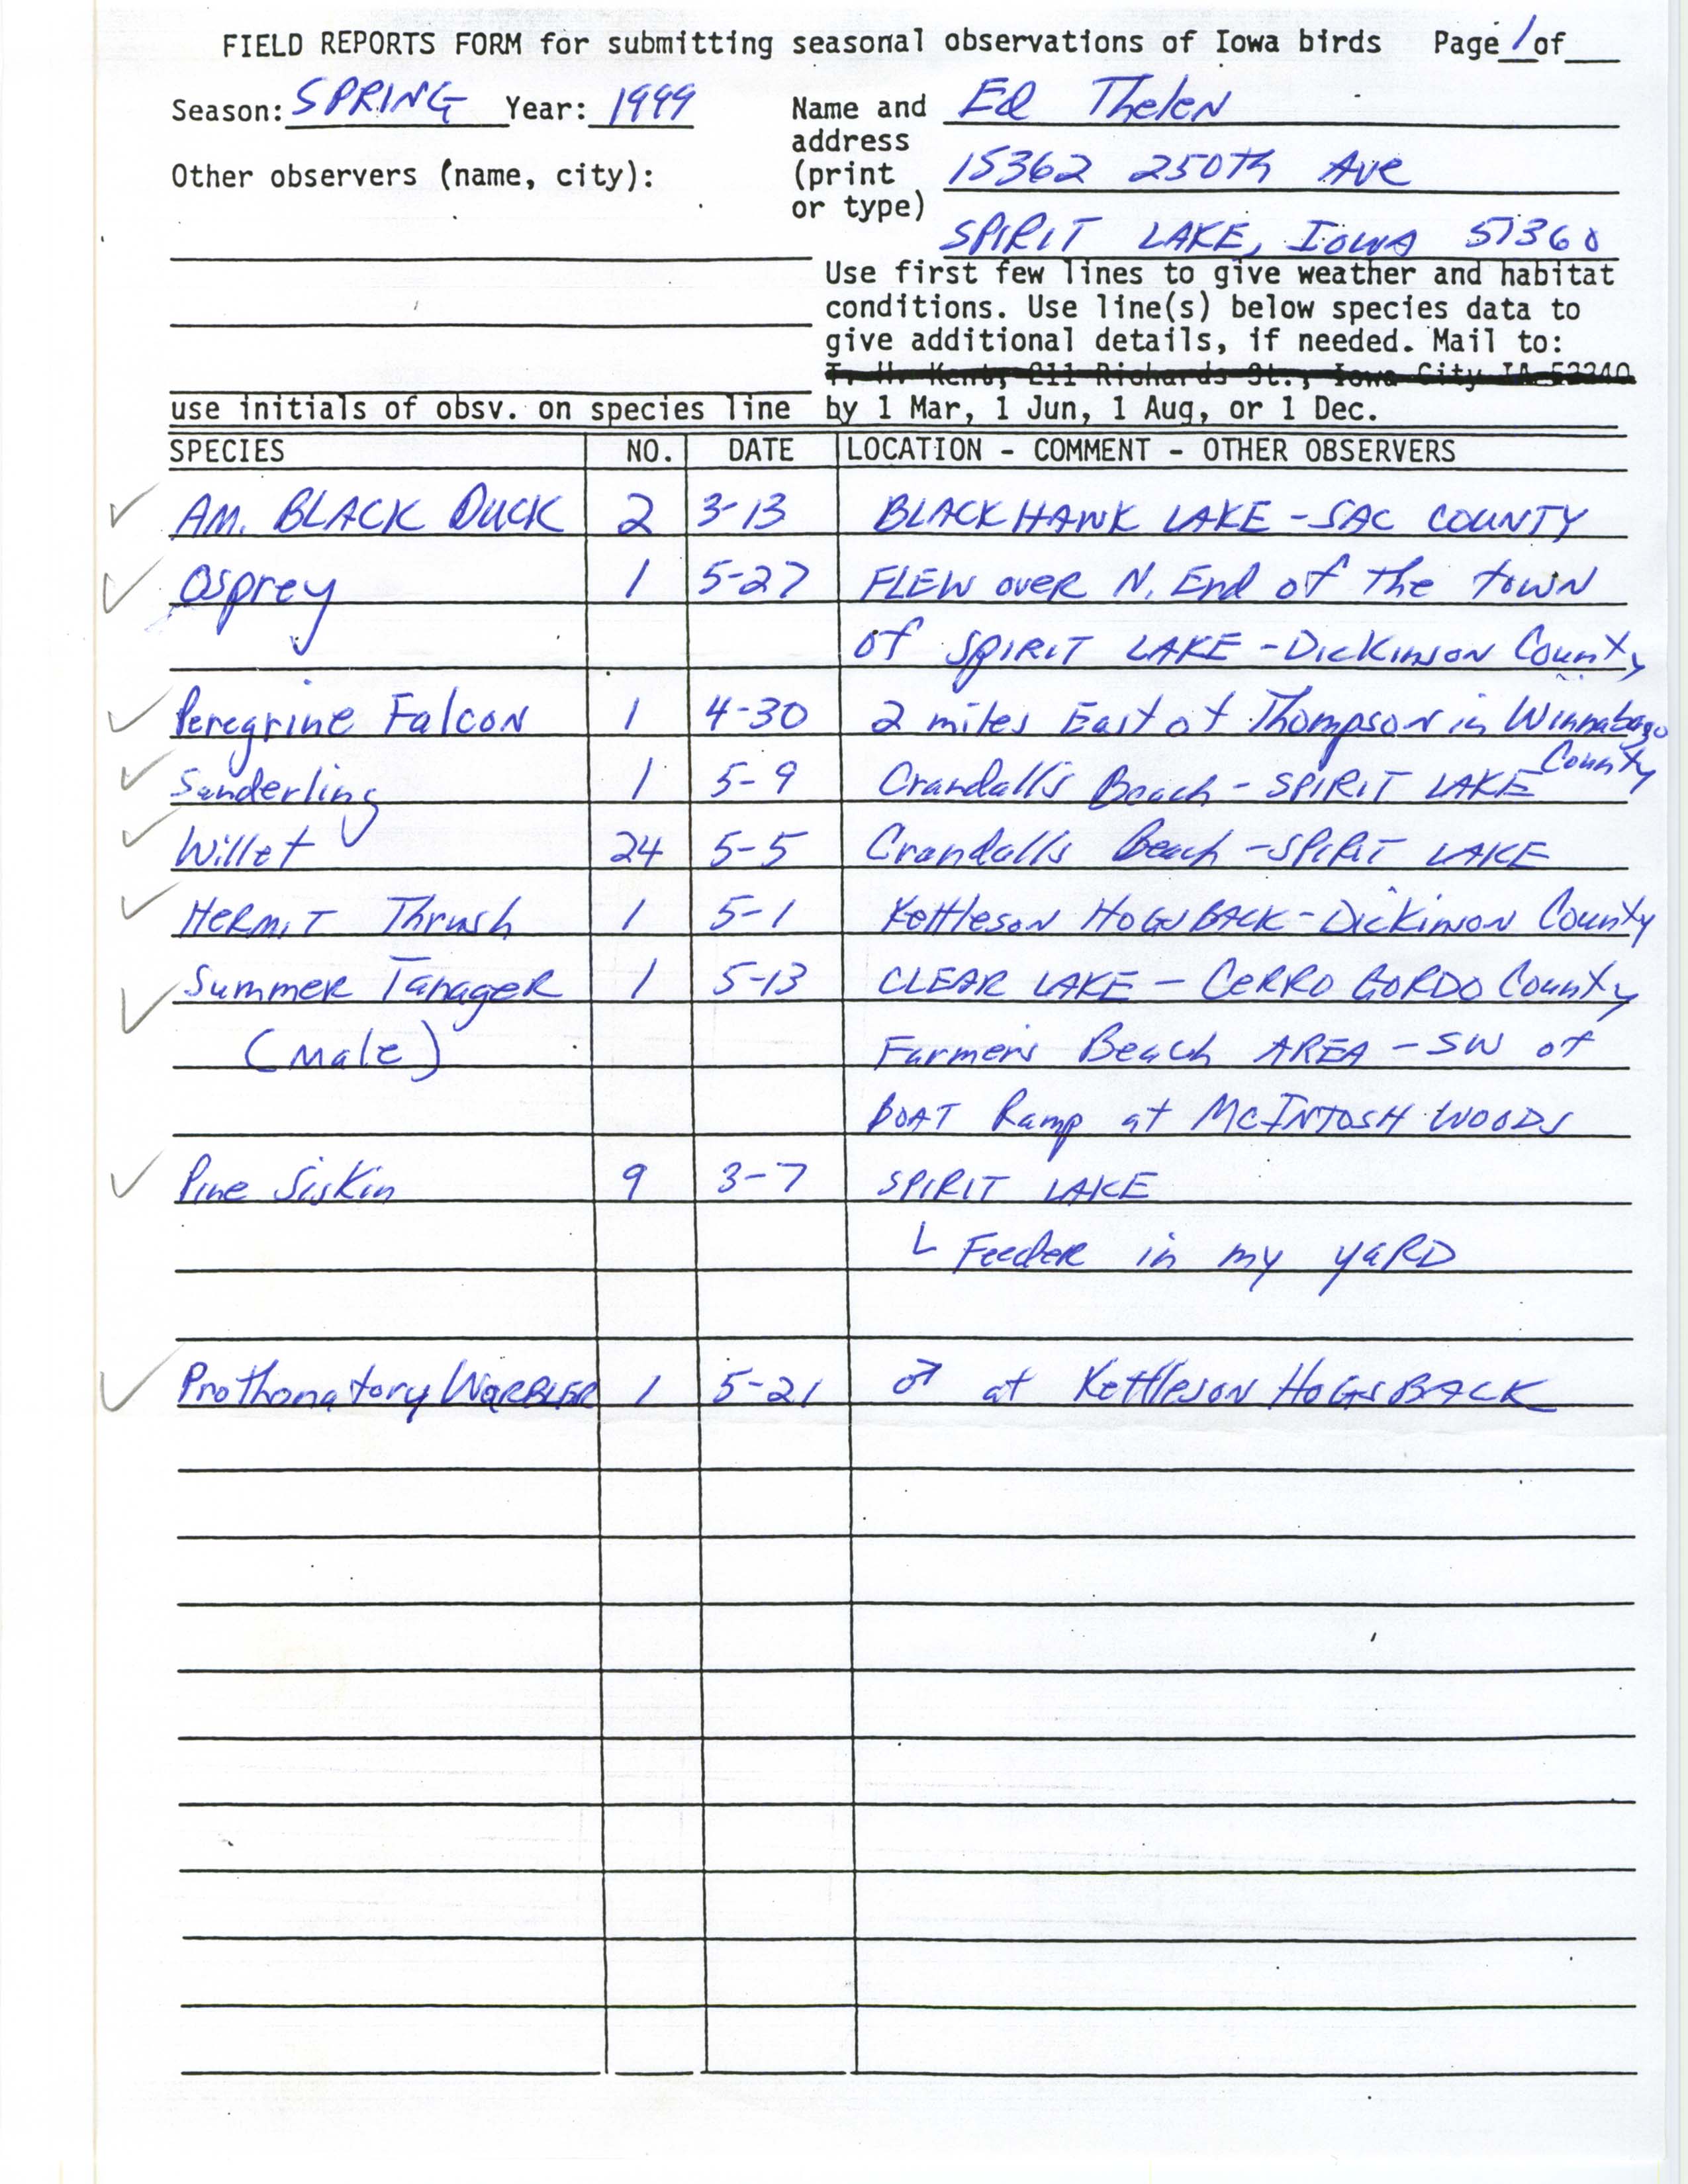 Field reports form for submitting seasonal observations of Iowa birds, Ed Thelen, spring 1999